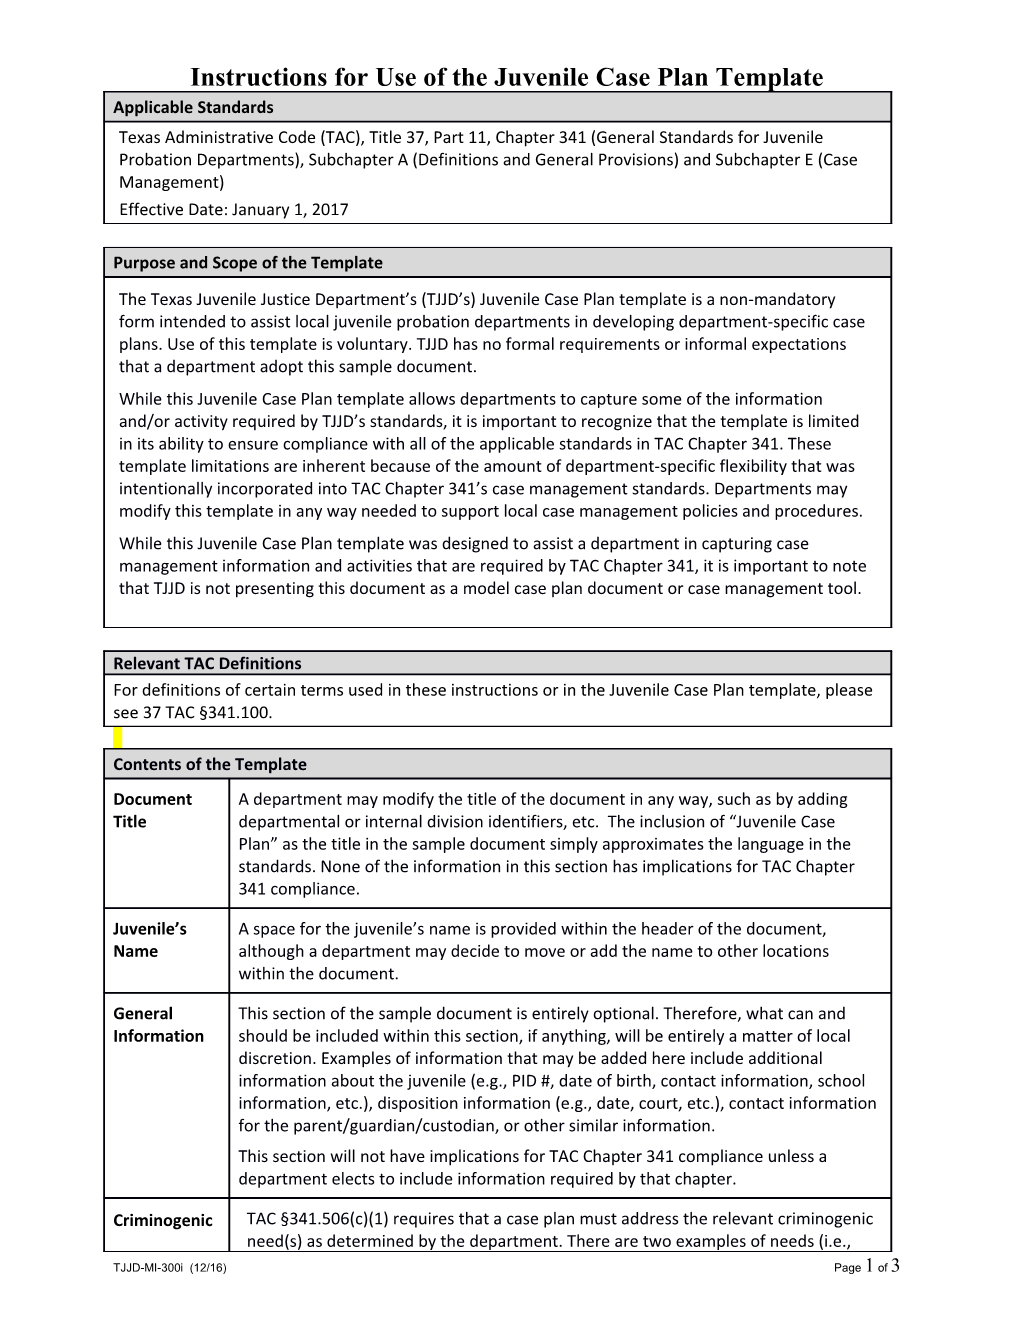 TJPC-FS-01-09 Child/Family Case Plan & Review of Child/Family Case Plan Field Supervision